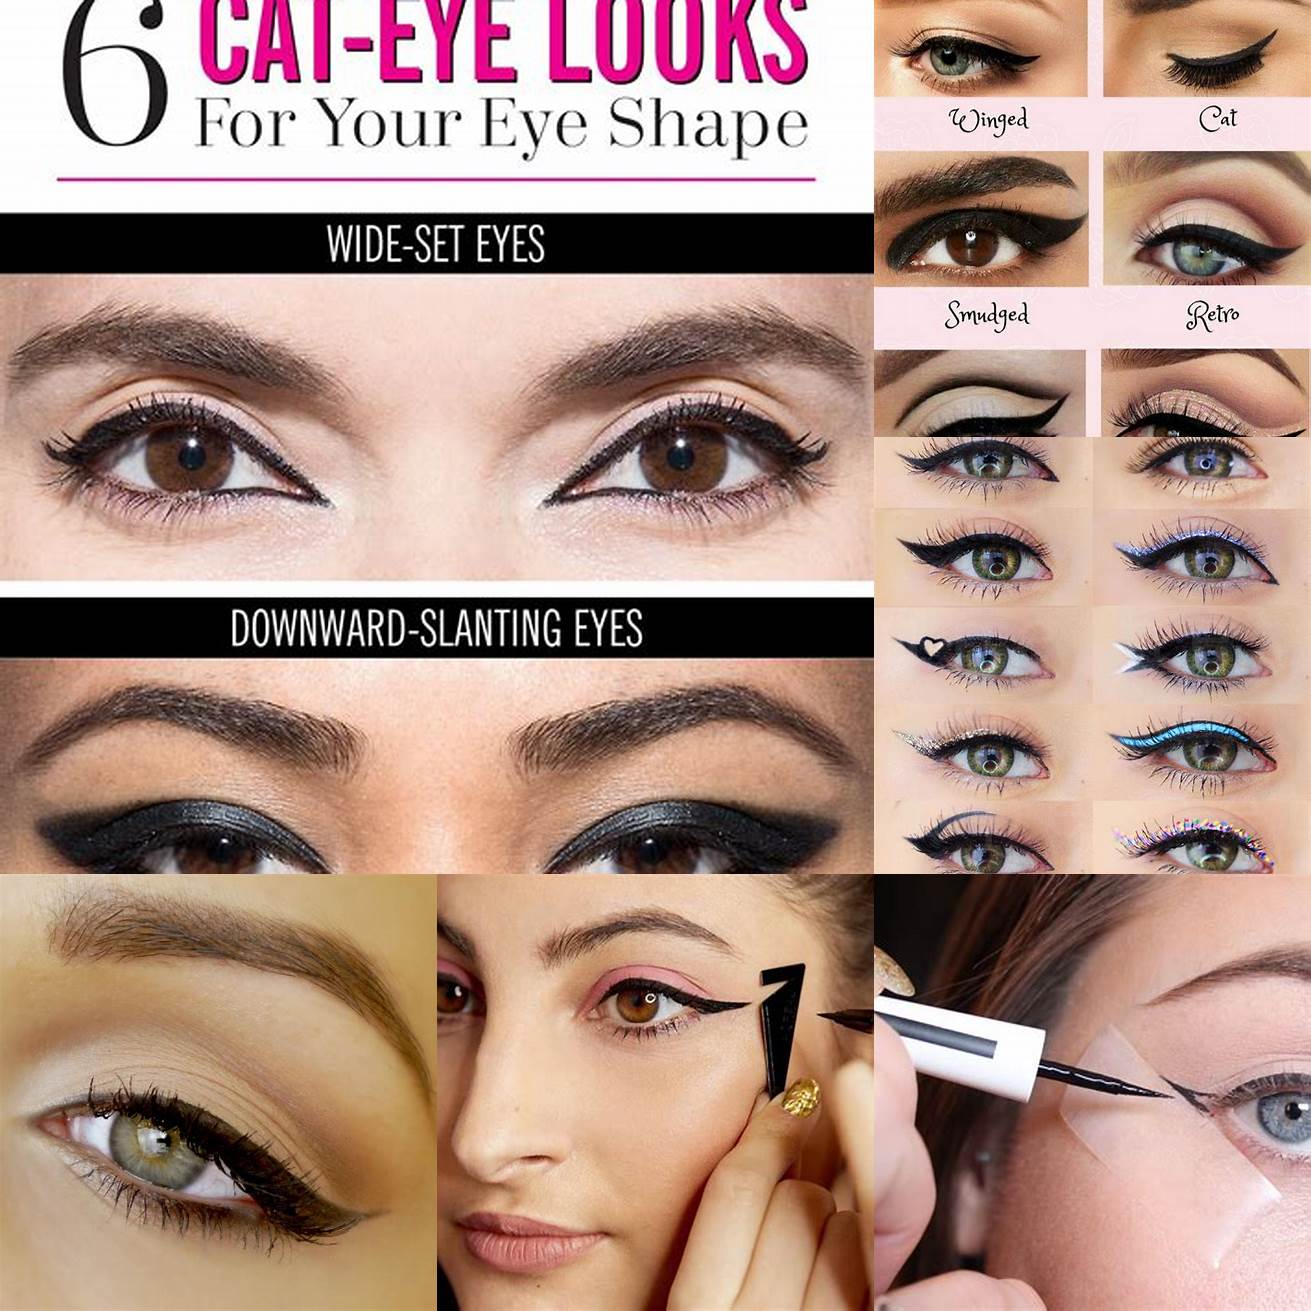 Use eyeliner to enhance the shape of the lens